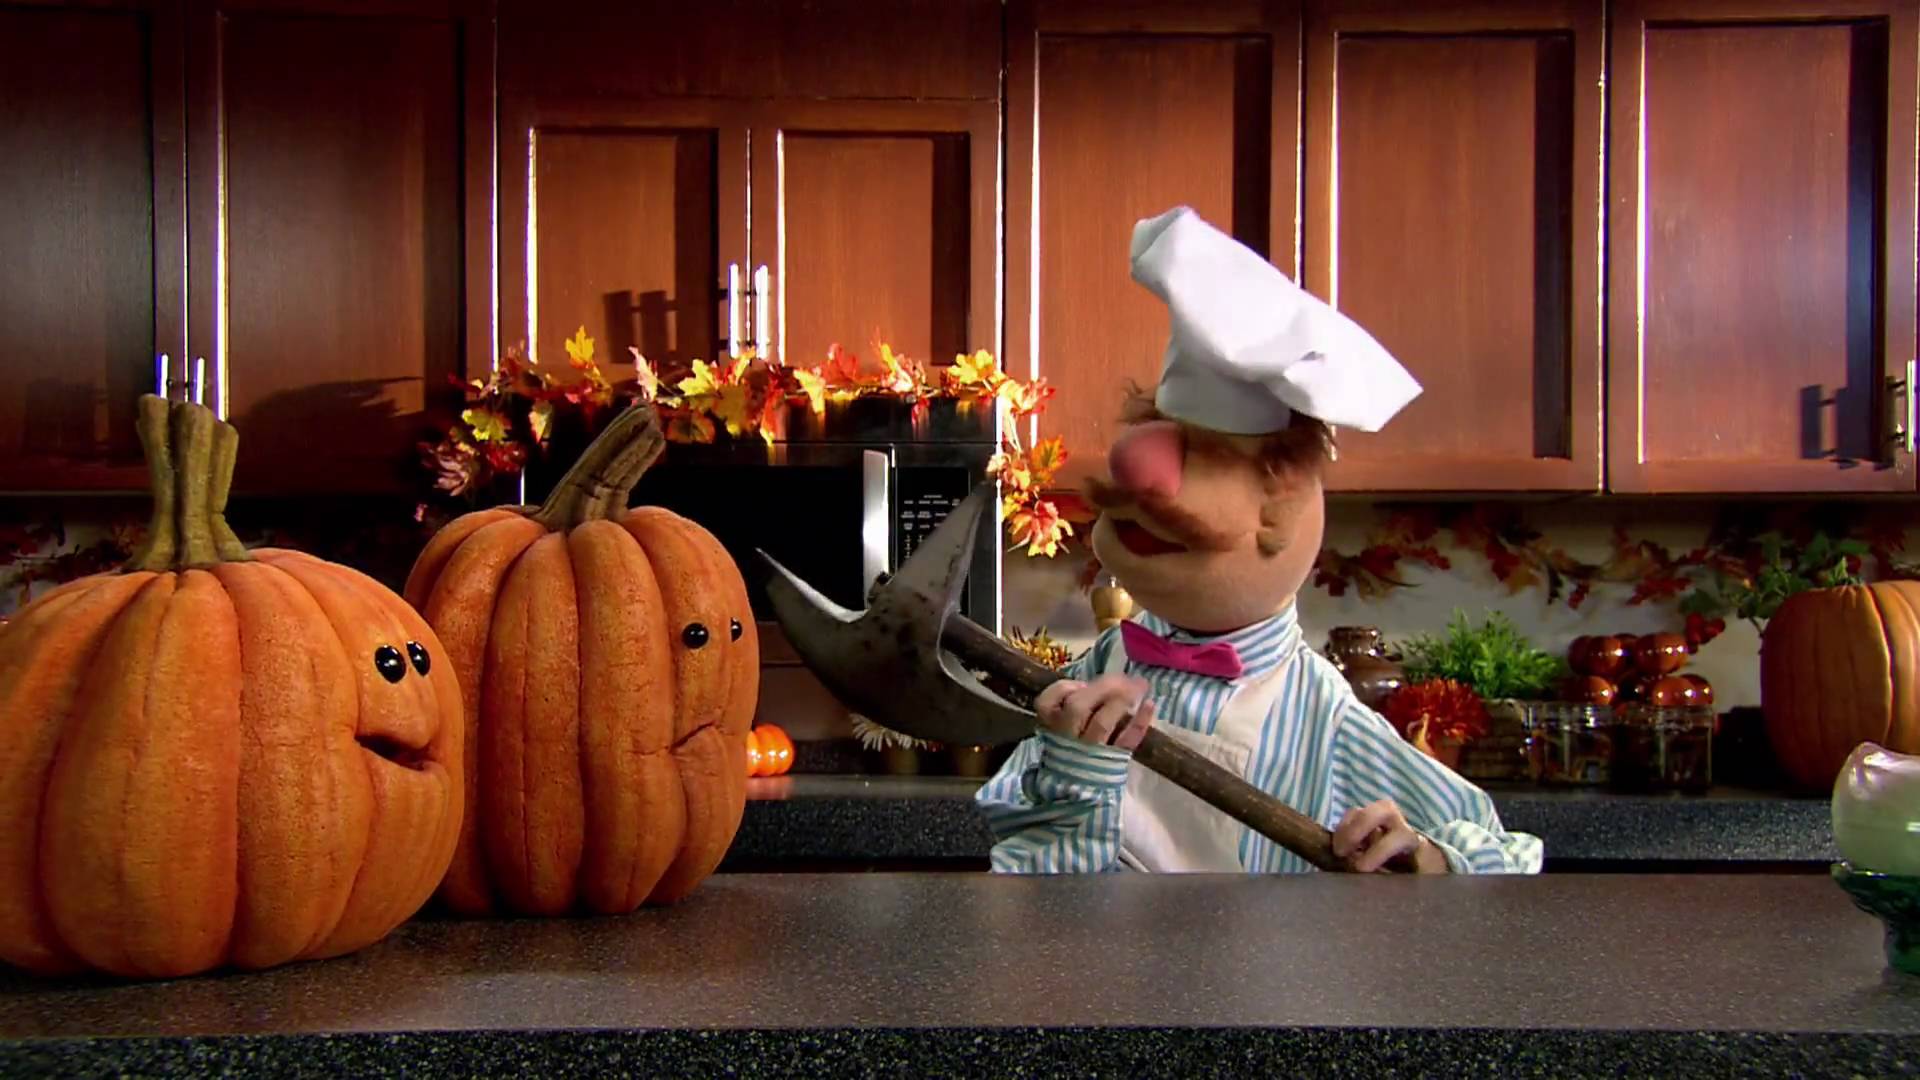 What does a meat slicer have to do with Halloween